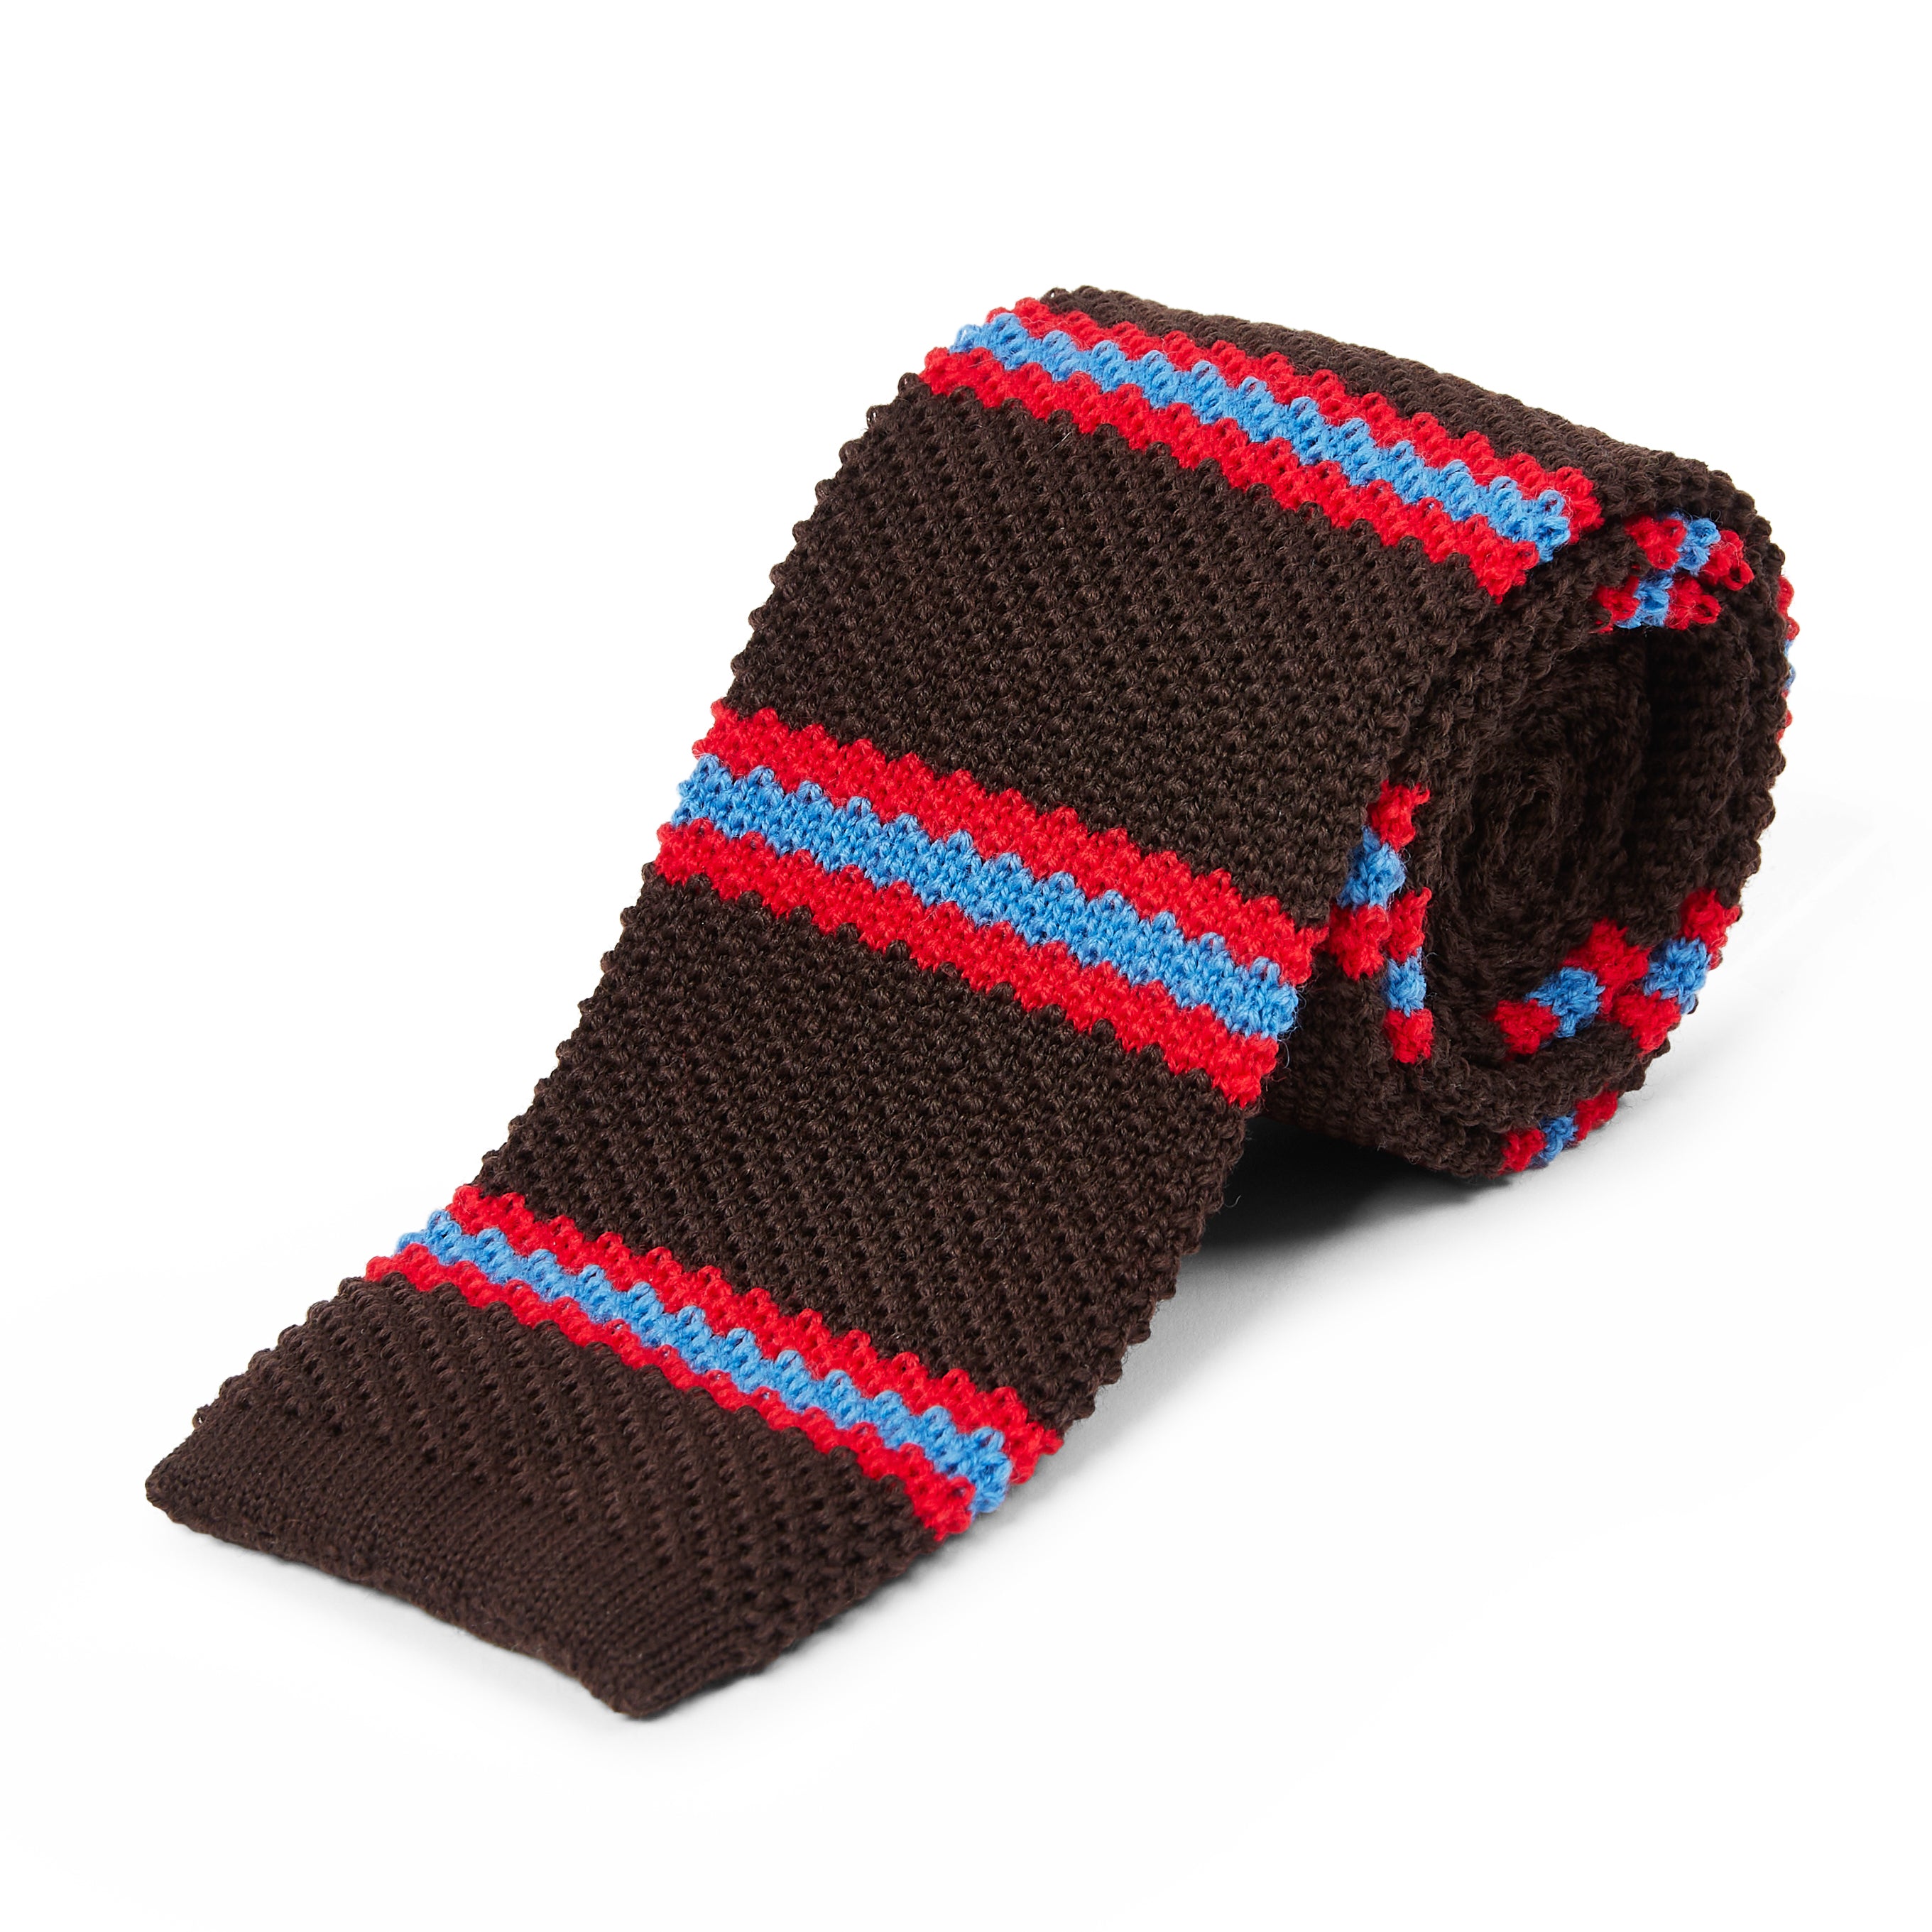 Burrows & Hare  Knitted Tie - Stripe Brown/red/blue